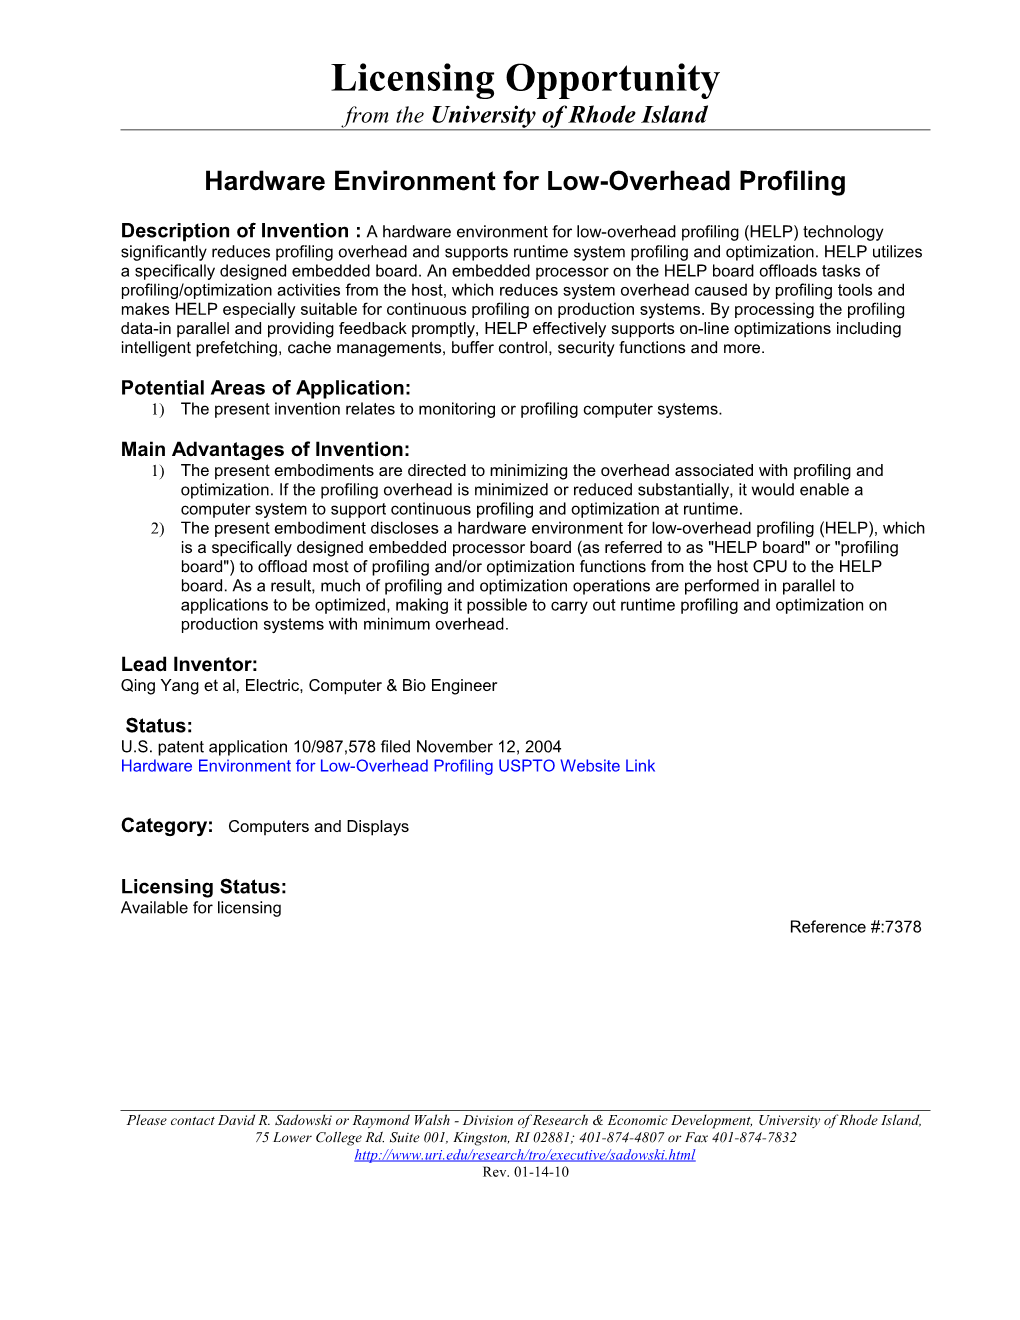 Hardware Environment for Low-Overhead Profiling